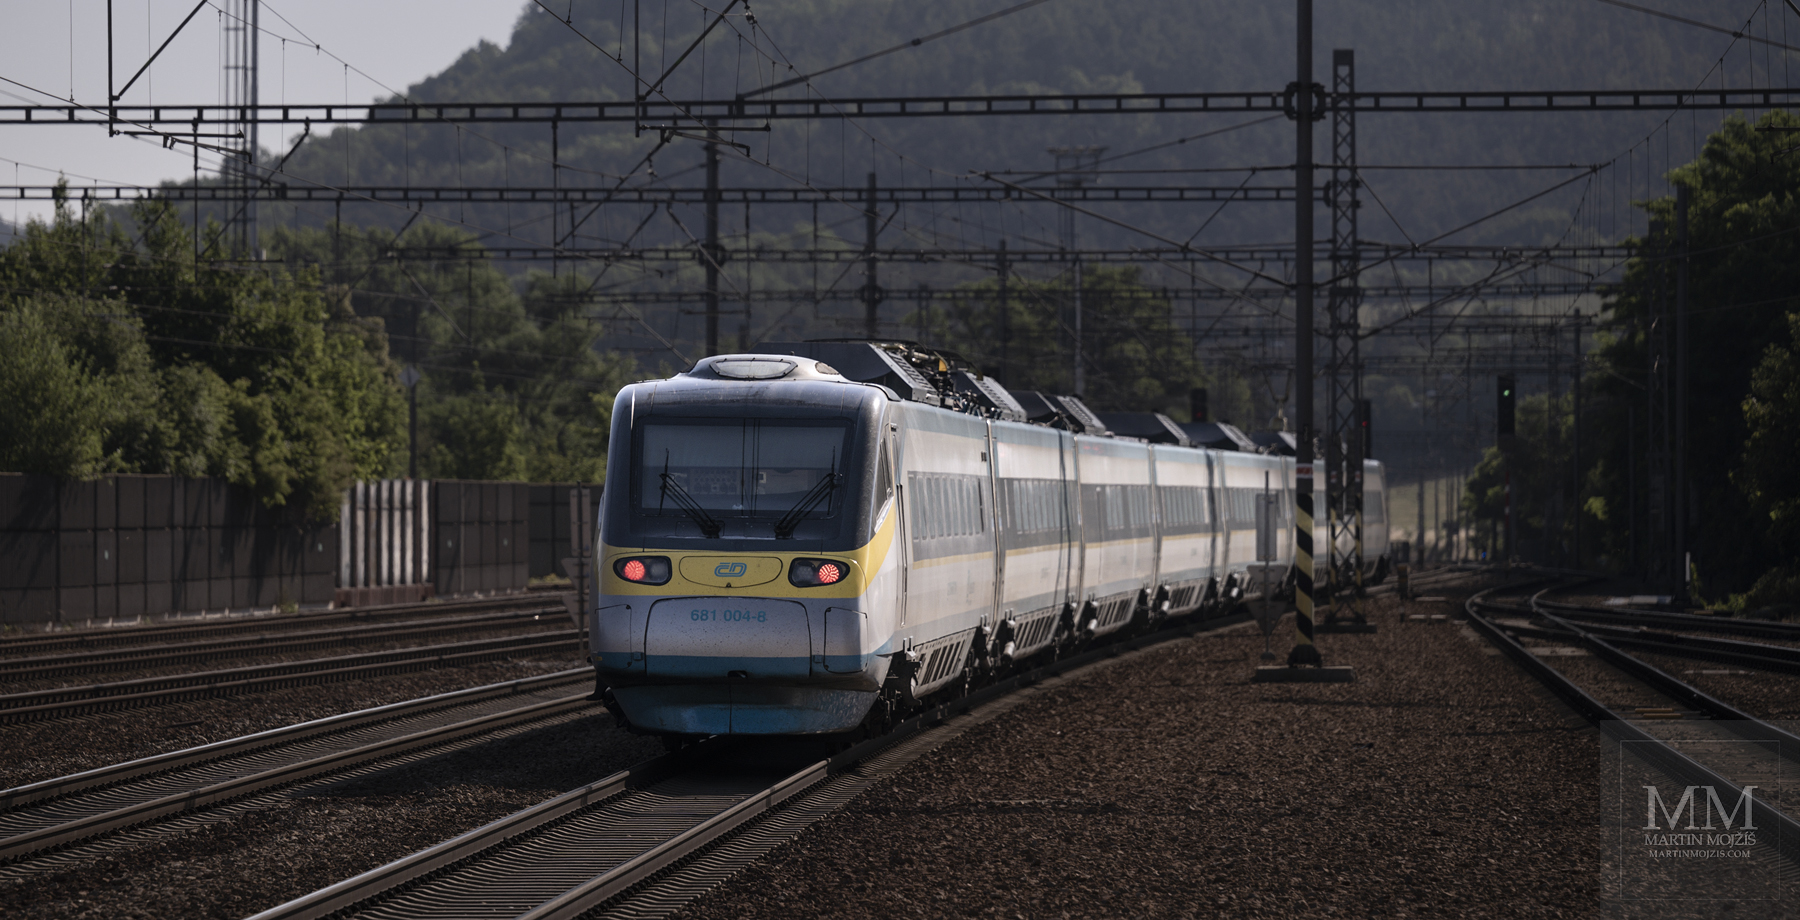 Pendolik for the second time, this time 681 004-8 on the way to Beroun.